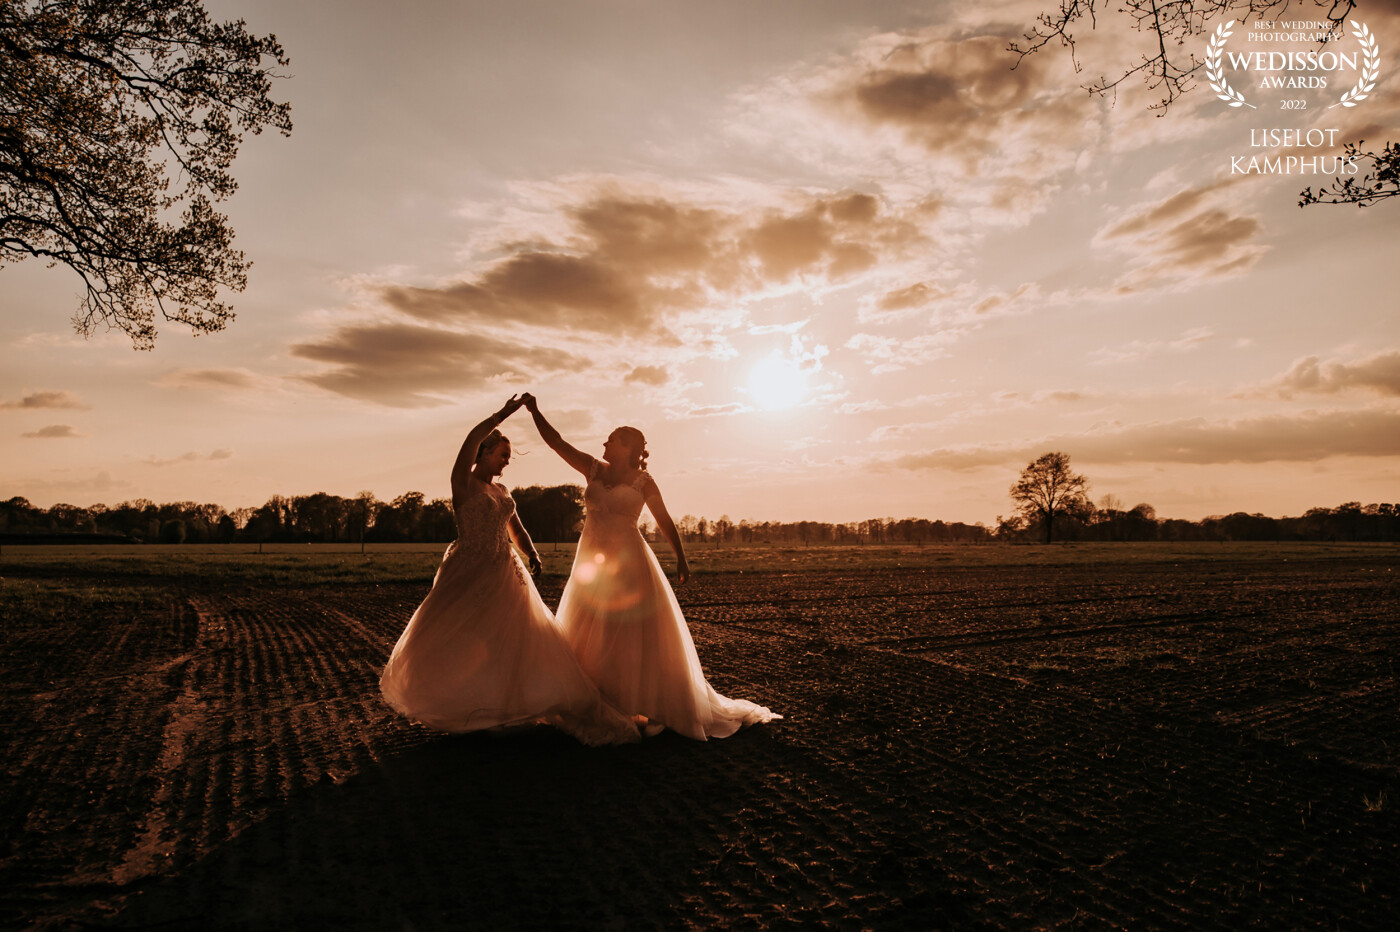 These two beautiful ladies wanted to take some extra shots with golden hour. I saw this field and let them dance together and celebrate their love.